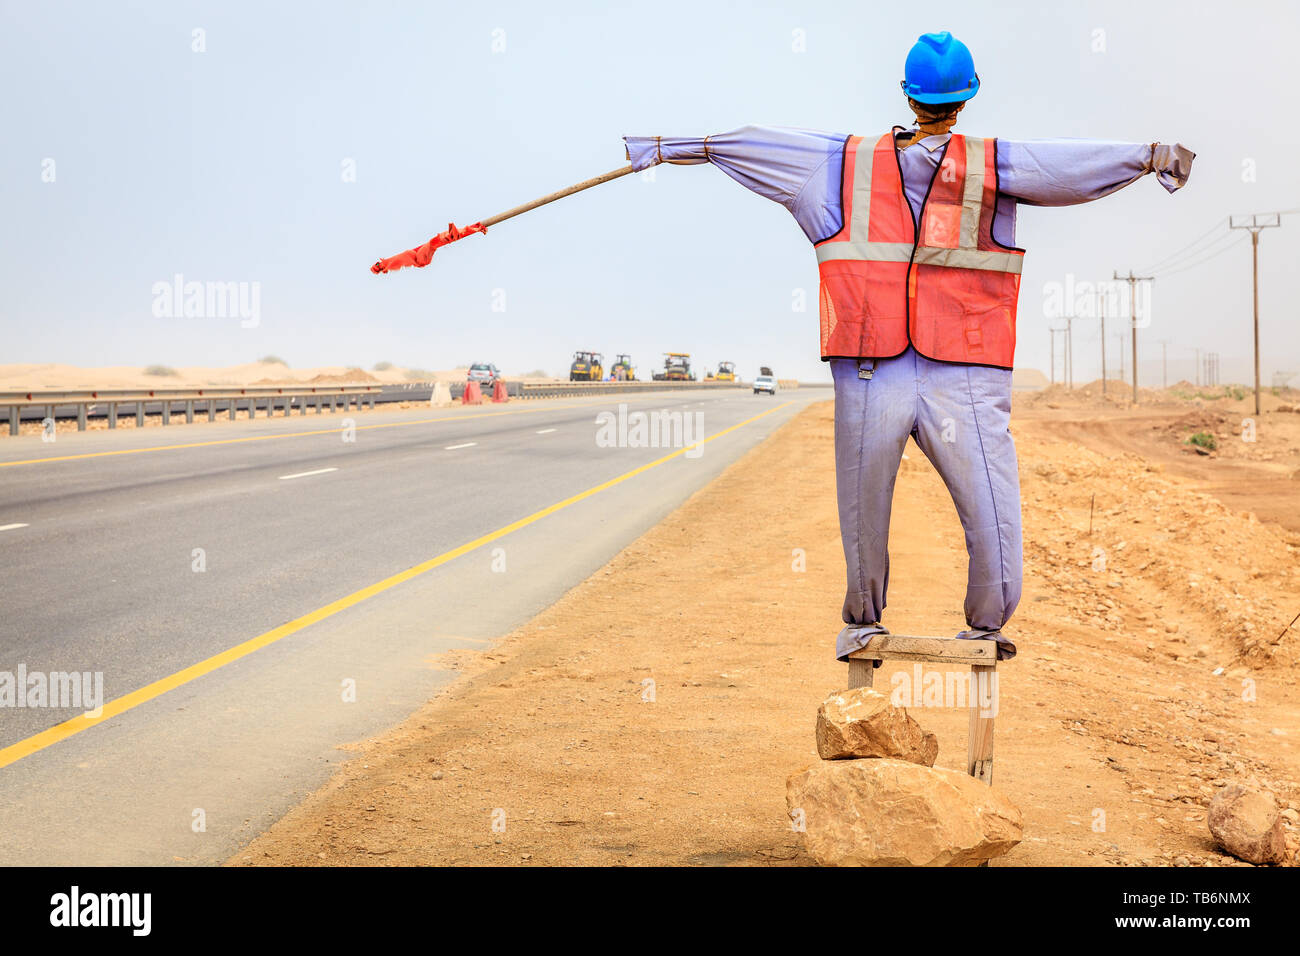 Manequin of a worker used at road construction sites in Oman Stock Photo